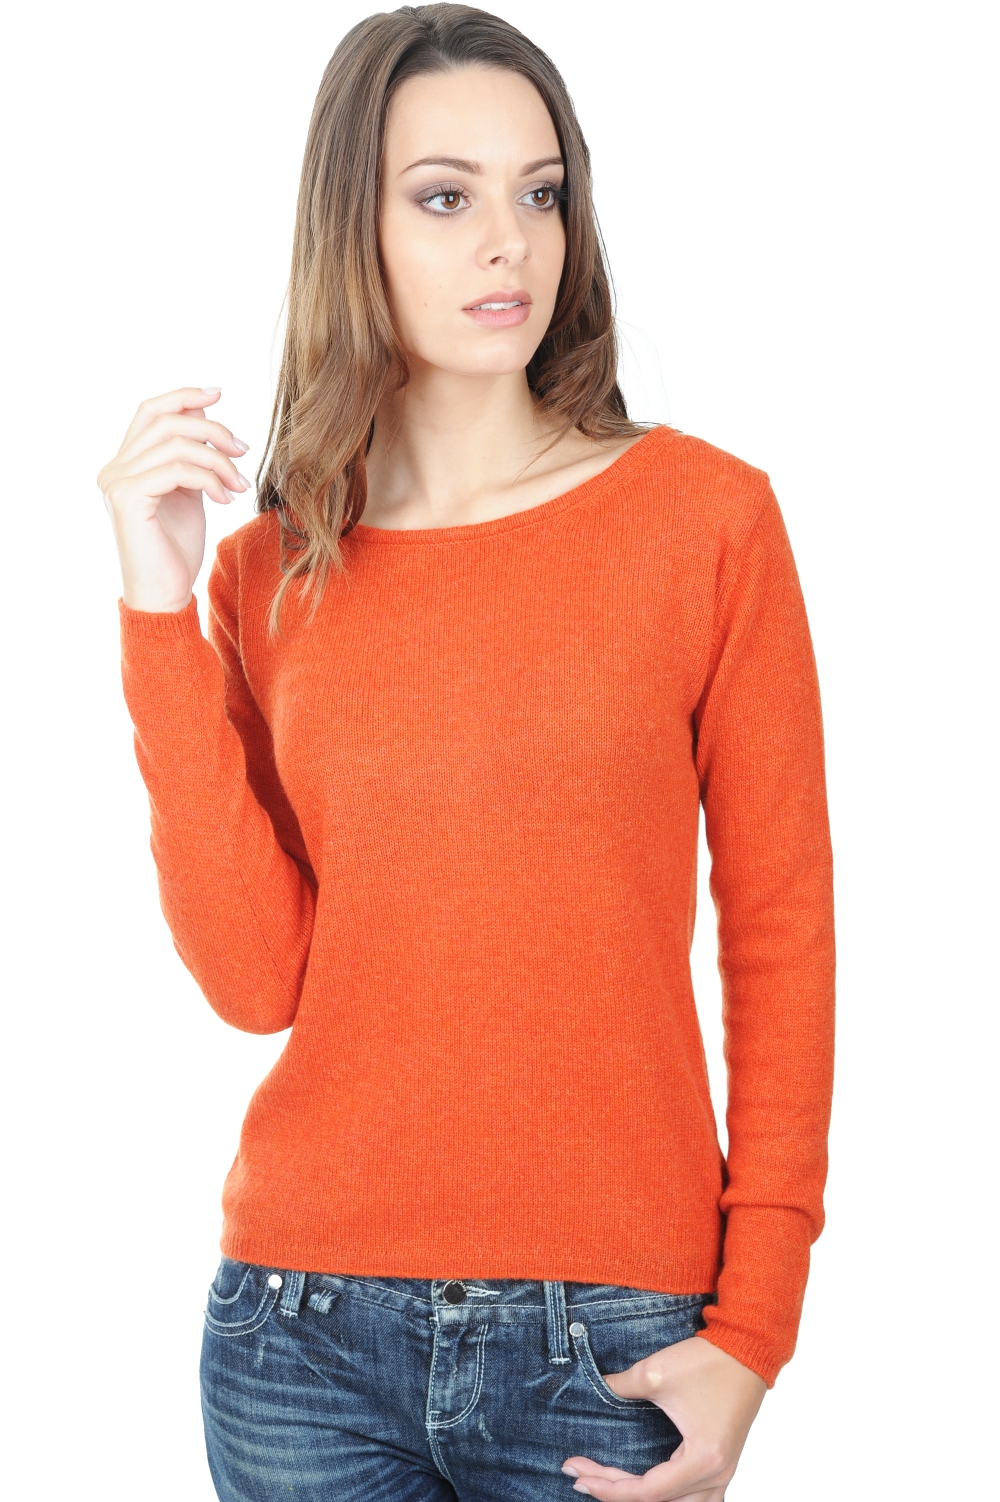 Cashmere ladies basic sweaters at low prices caleen paprika xs